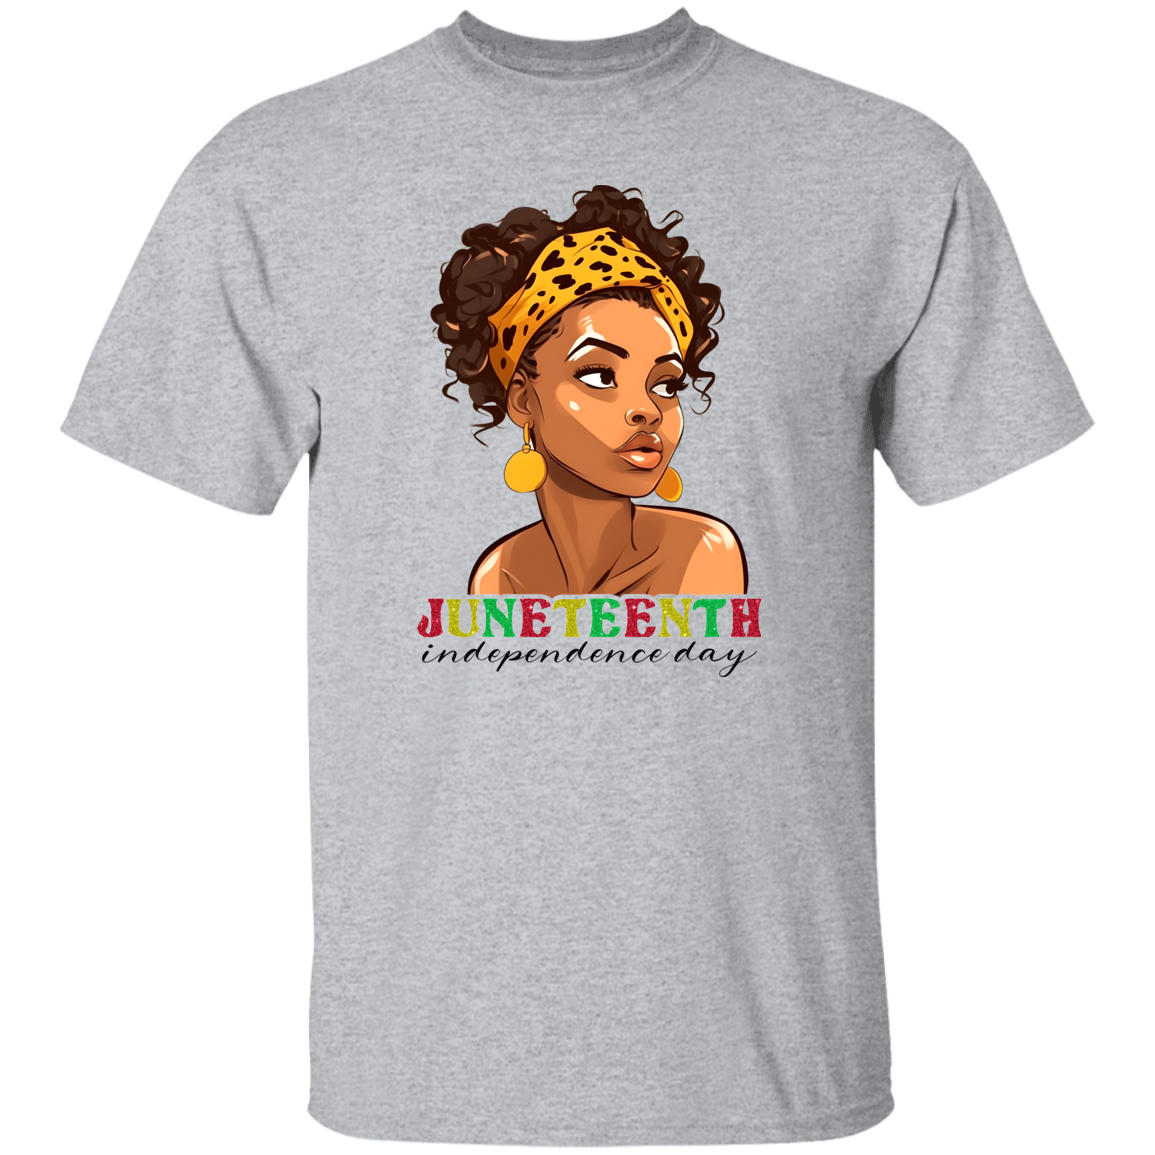 Juneteenth Independence Day T-Shirt